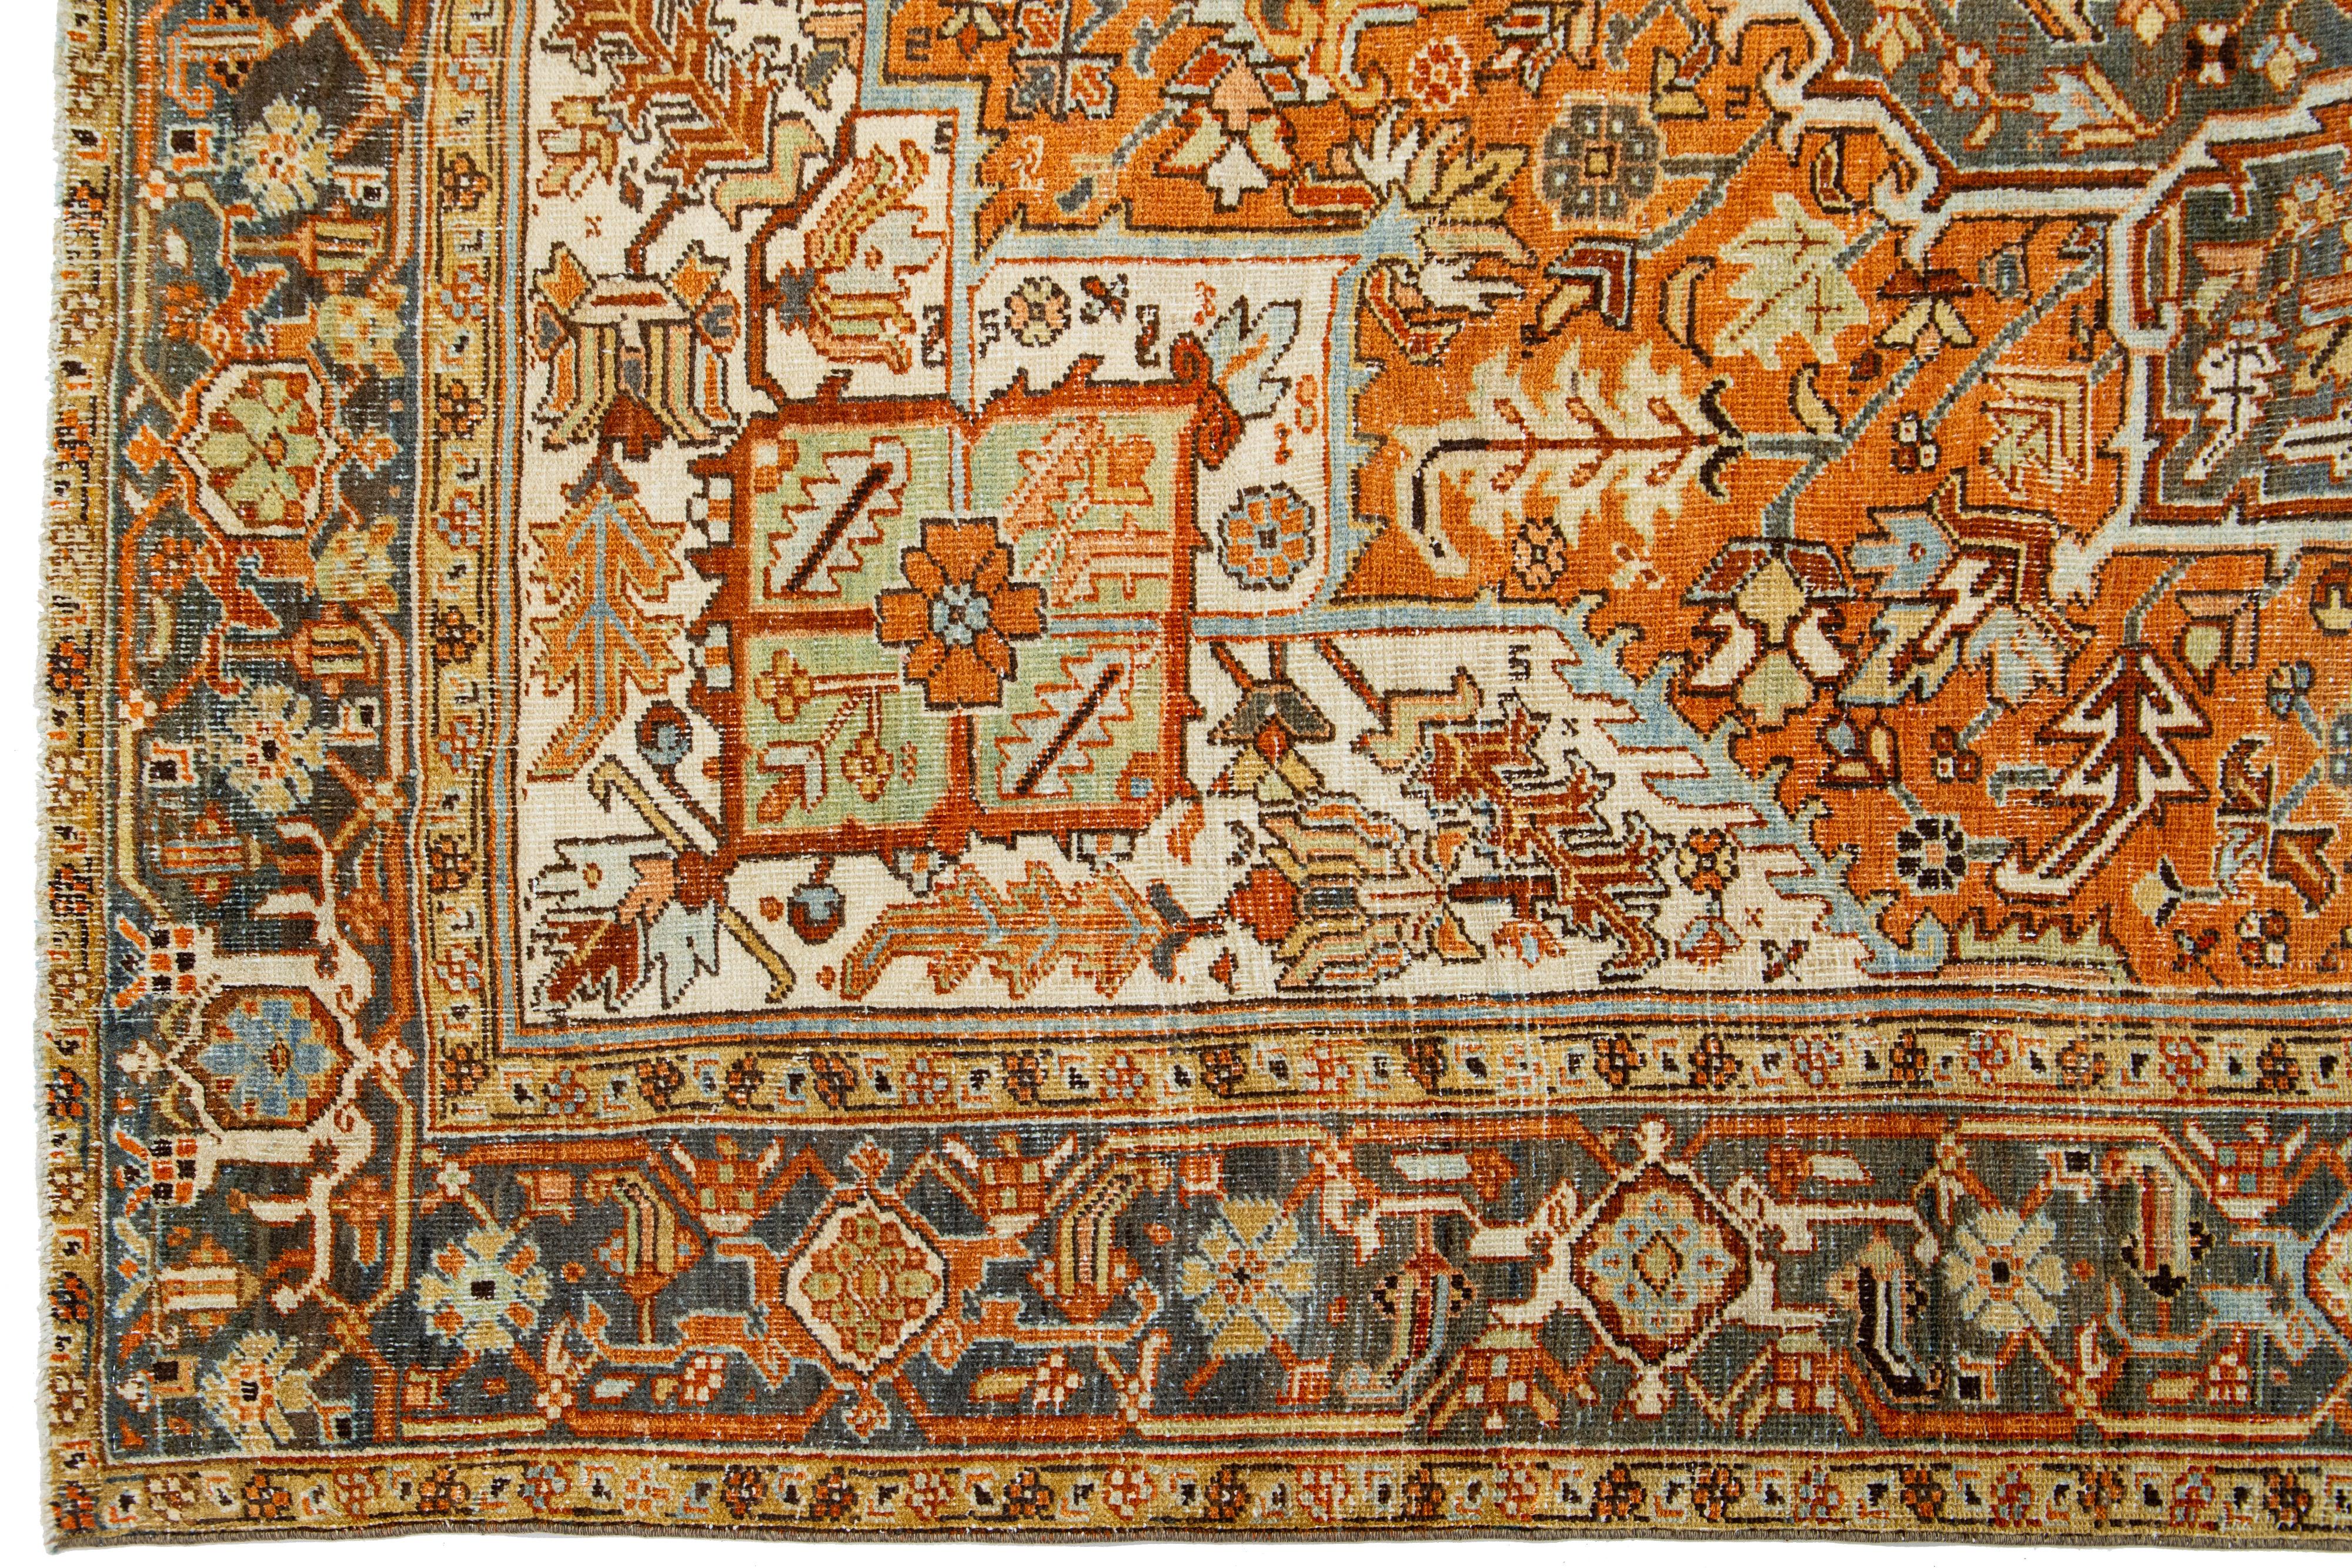 Persian 1910s Antique Heriz Medallion Wool Rug With Orange-Rust Color Design In Excellent Condition For Sale In Norwalk, CT